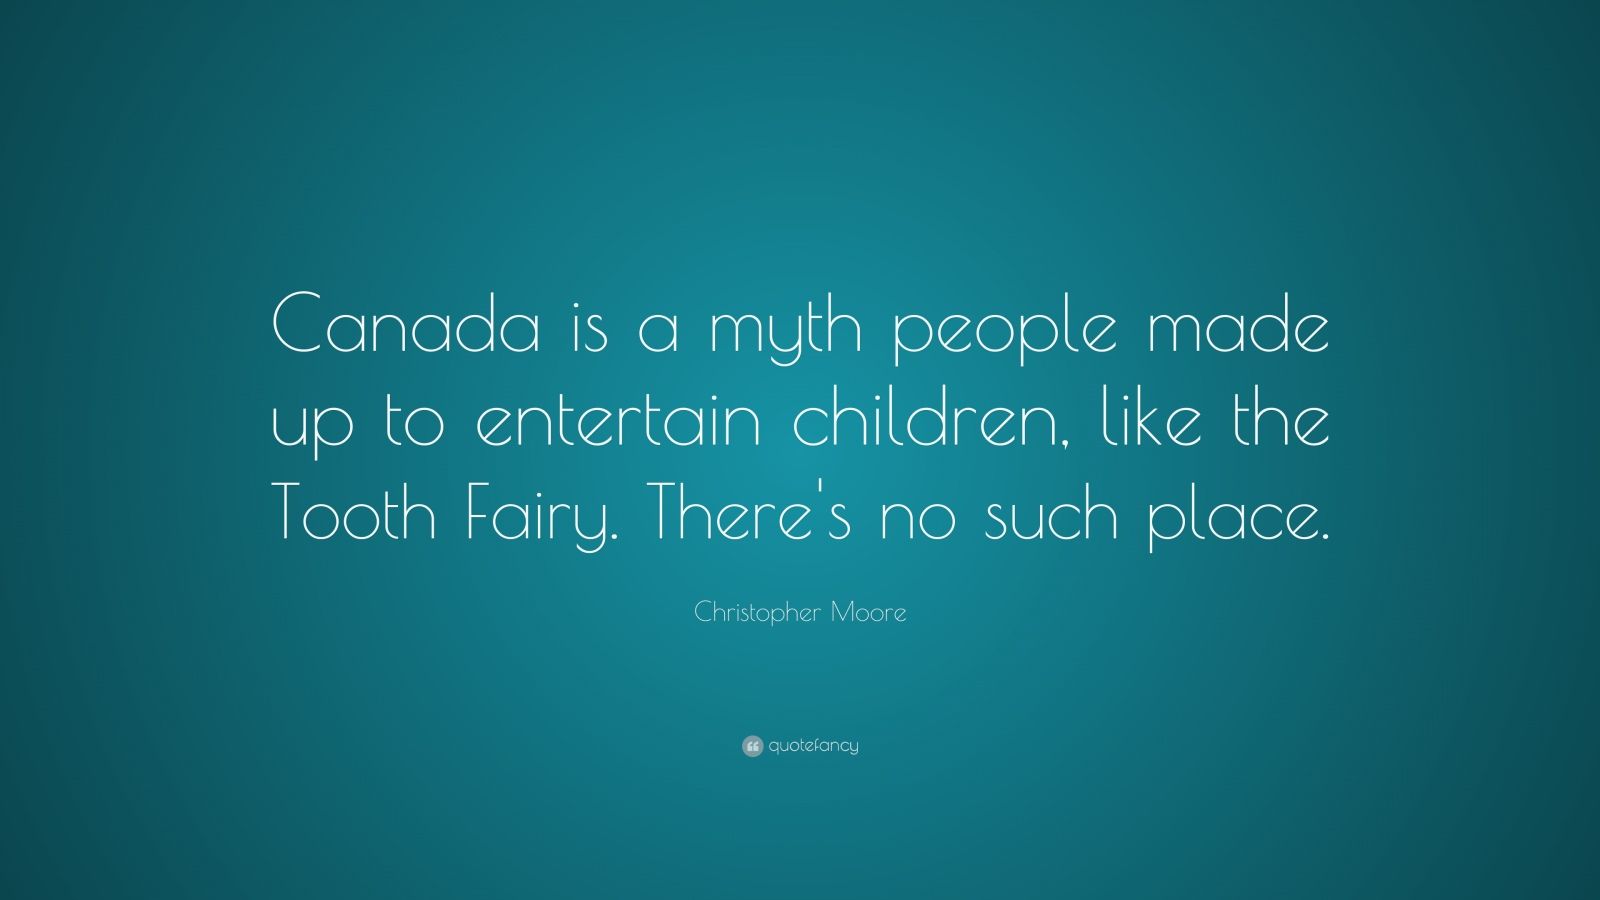 Christopher Moore Quote “Canada is a myth people made up to entertain children